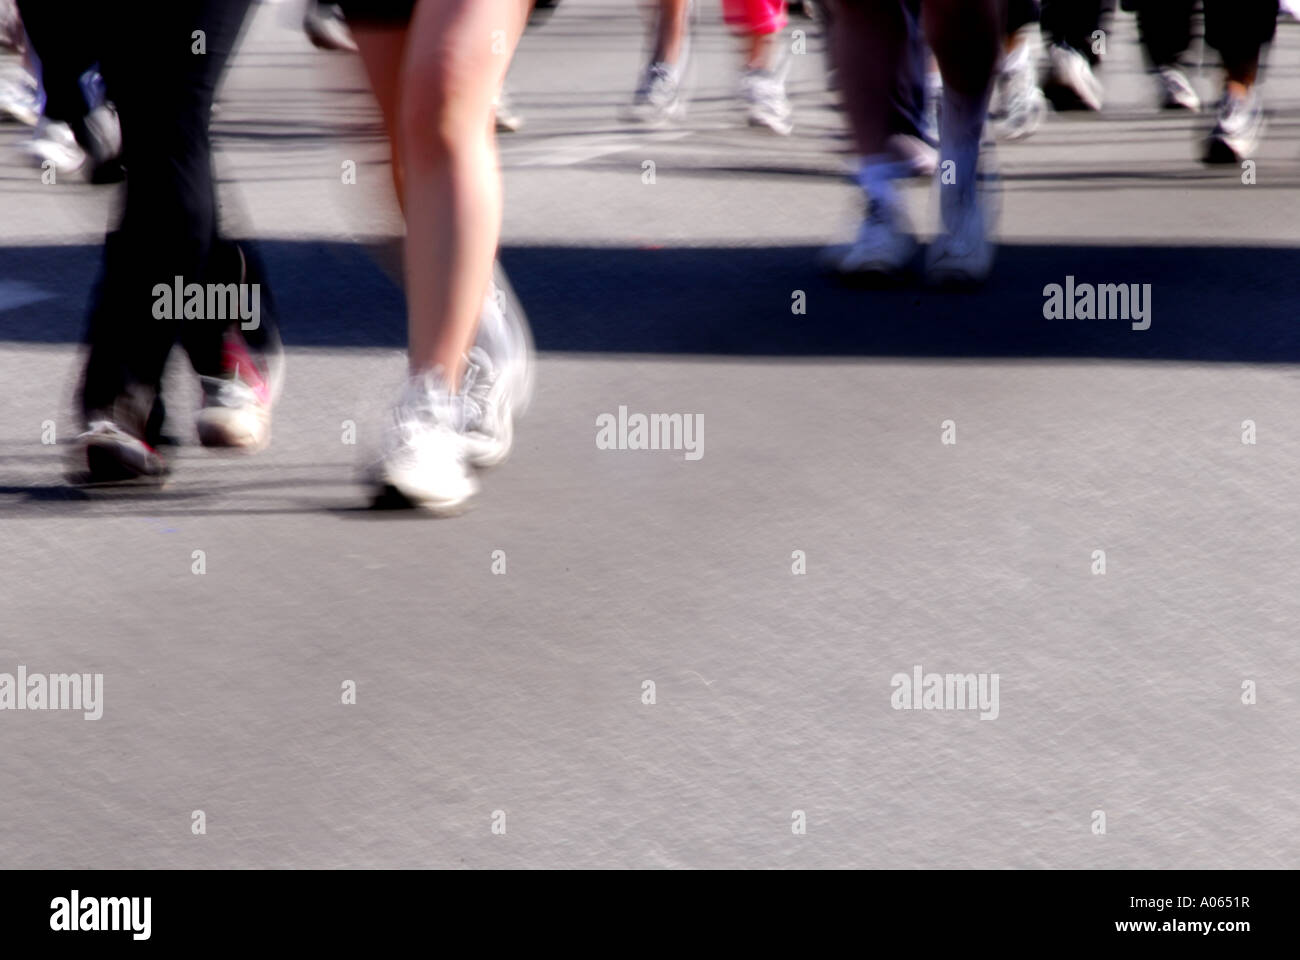 group of people running together Stock Photo